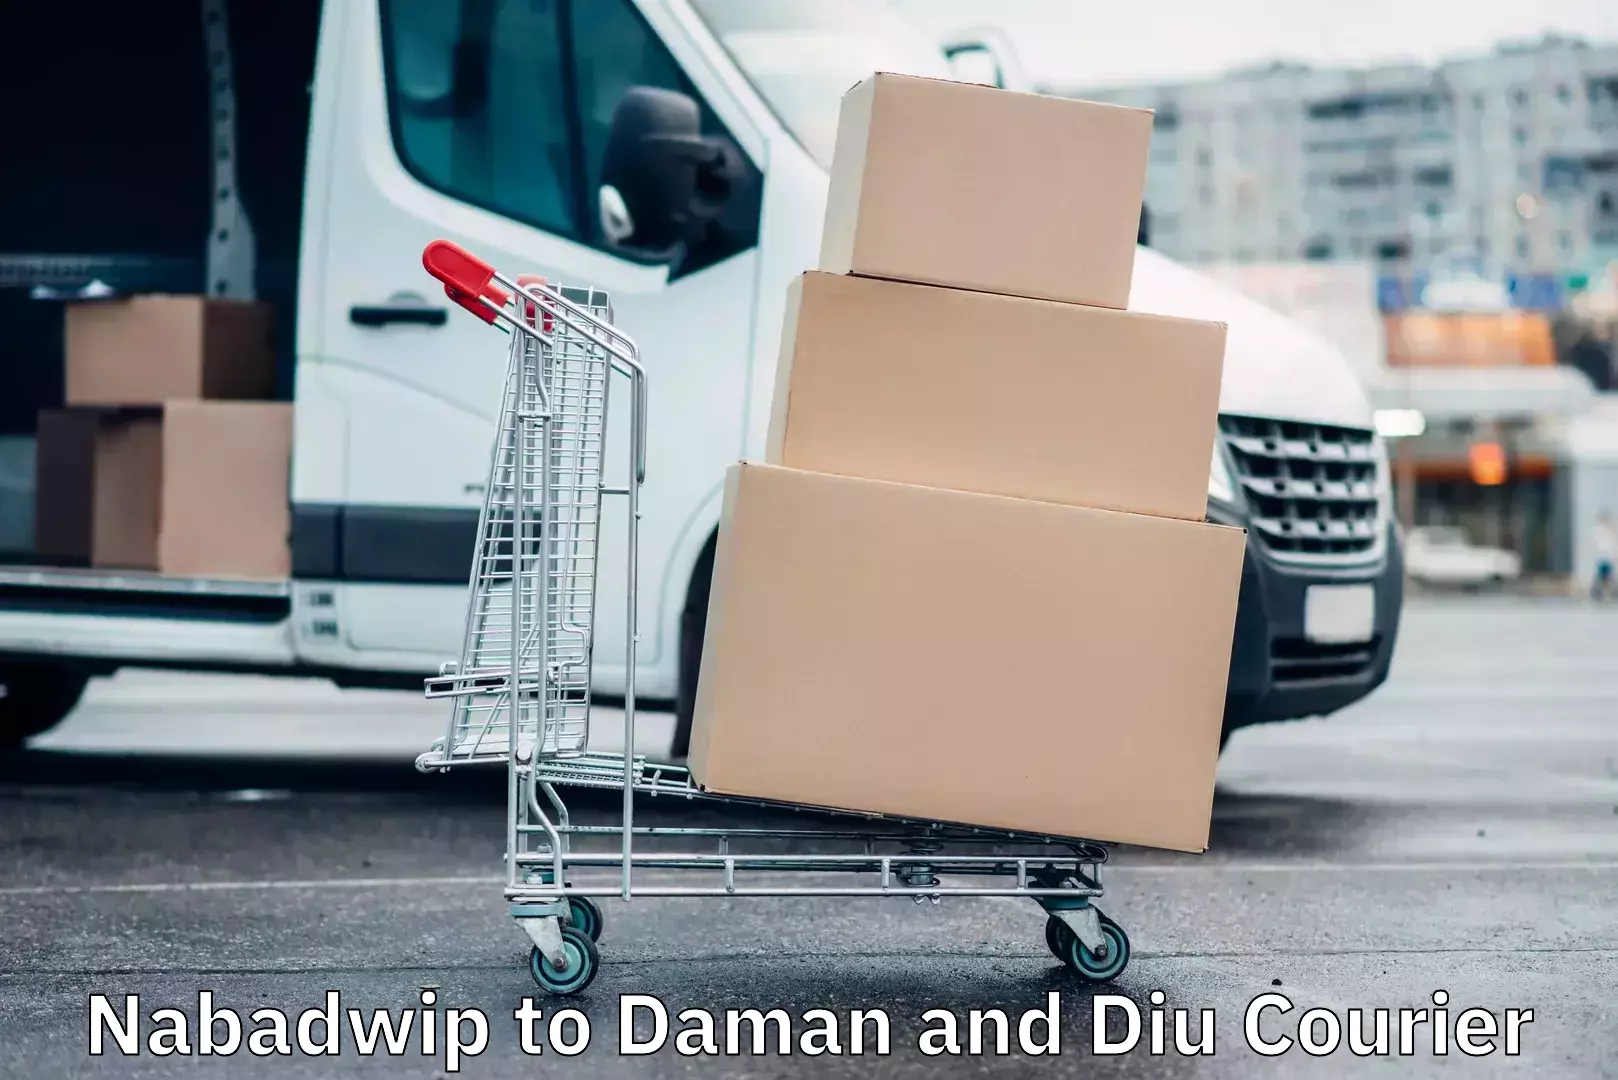 Business delivery service Nabadwip to Daman and Diu